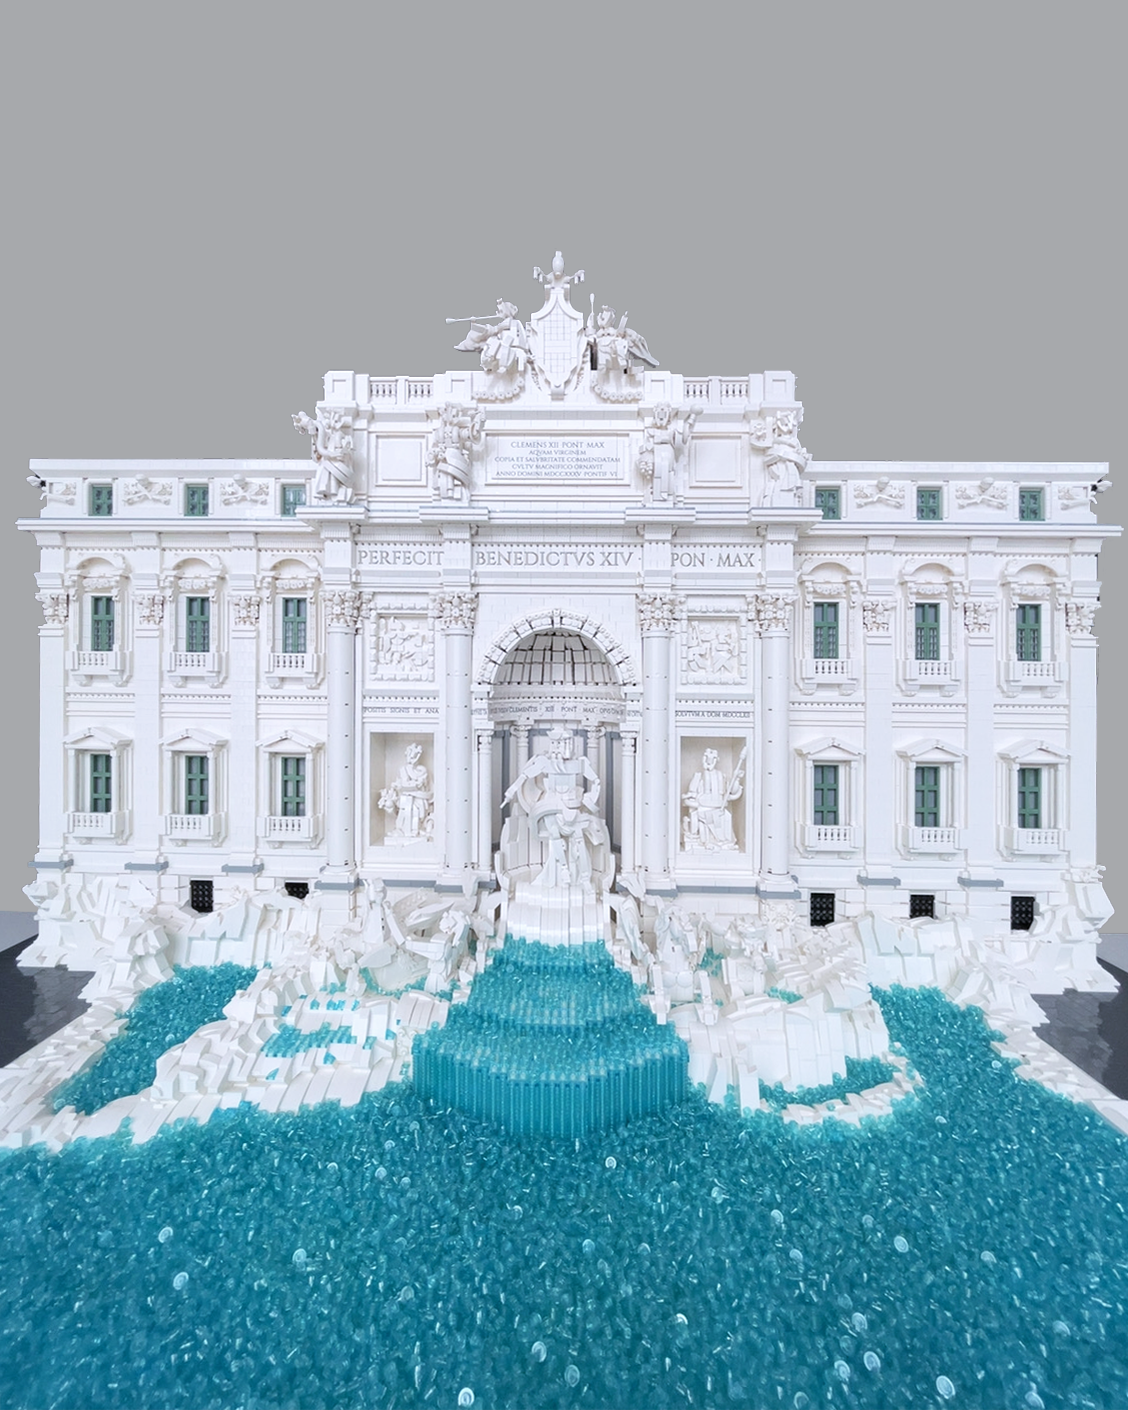 I Found Rome a City of The UCS LEGO Trevi Fountain - BrickNerd - things LEGO and the fan community